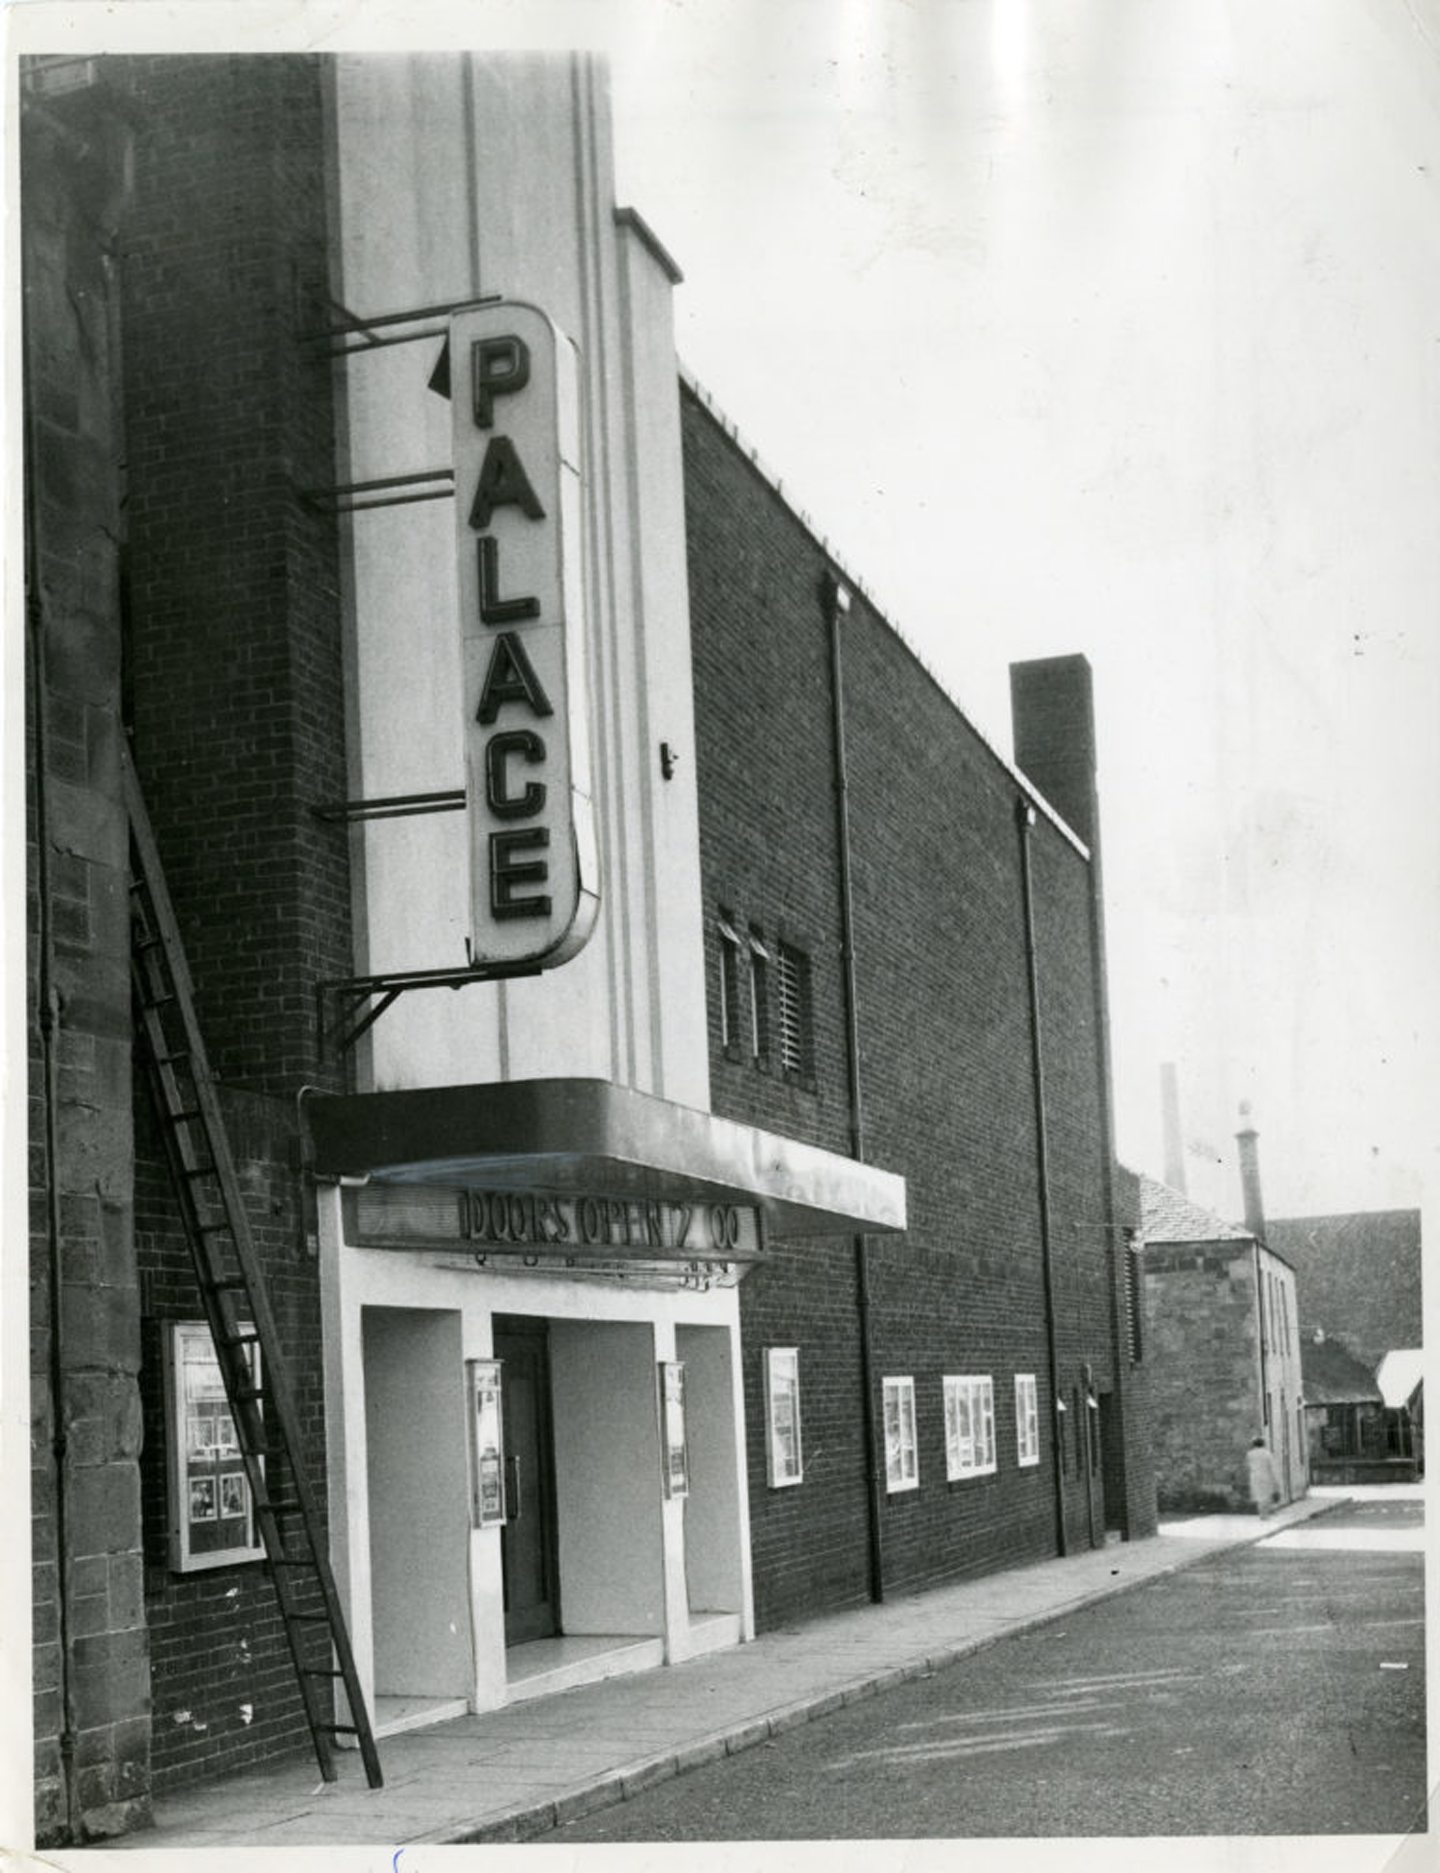 The Palace Theatre in Arbroath. Arbroath. Image: DC Thomson.